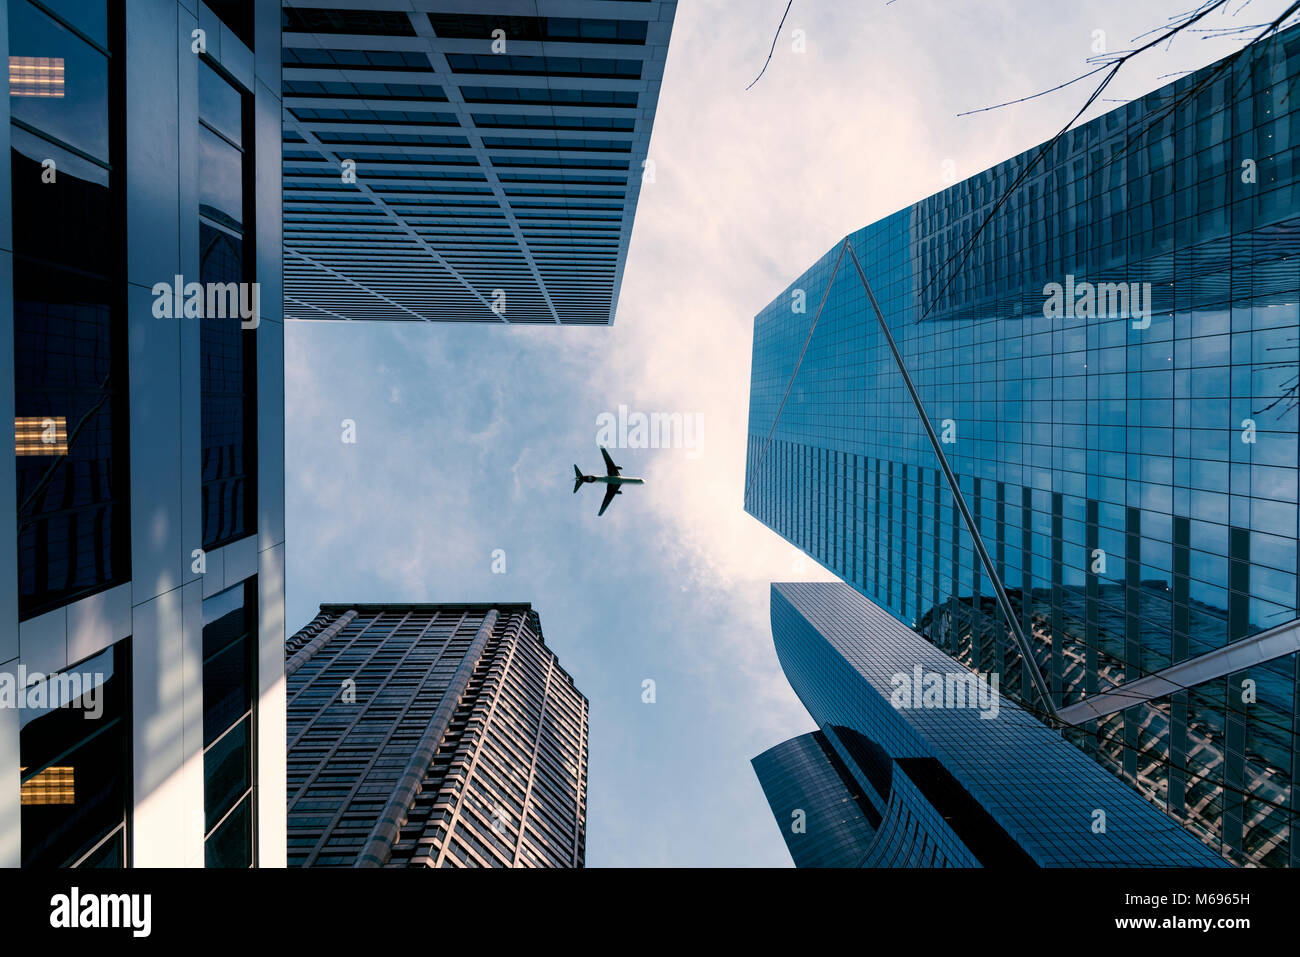 Looking up at the F5 tower and an airplane flying under partly cloudy blue sky horizontal landscape. Stock Photo